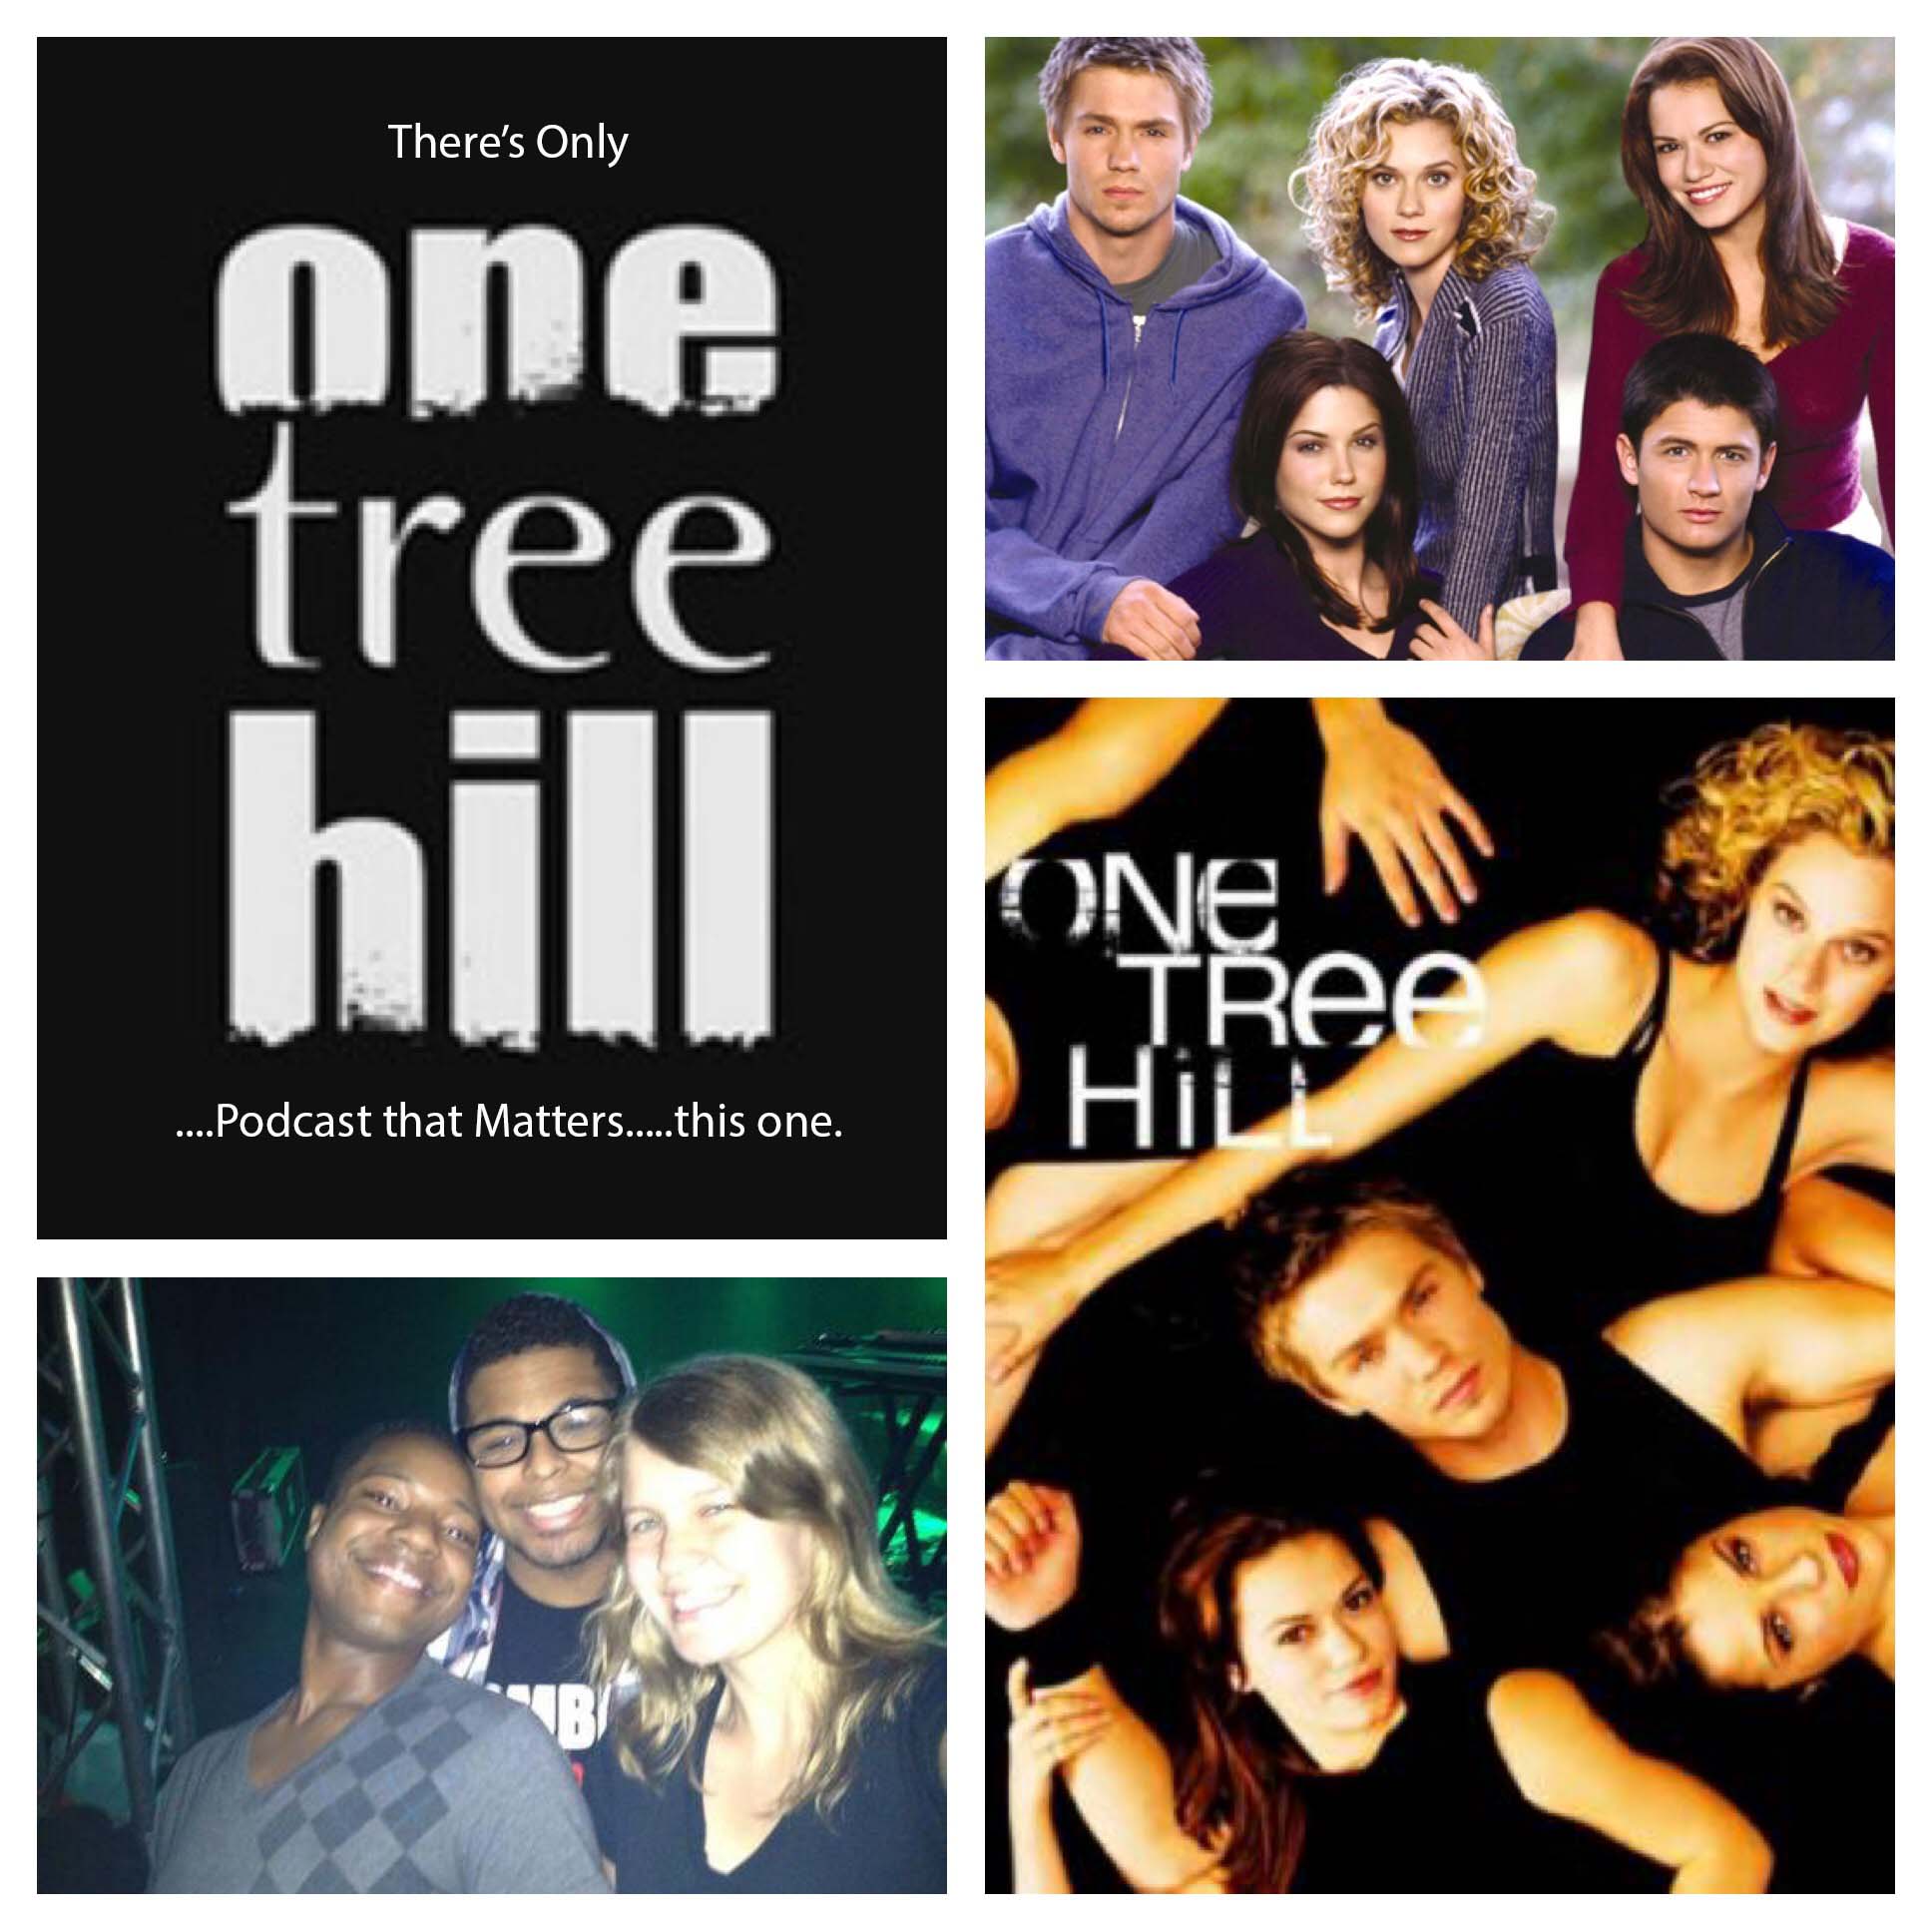 Ball is Life Because it's on the Cross- Welcome to Tree Hill -Pilot and Episode 2